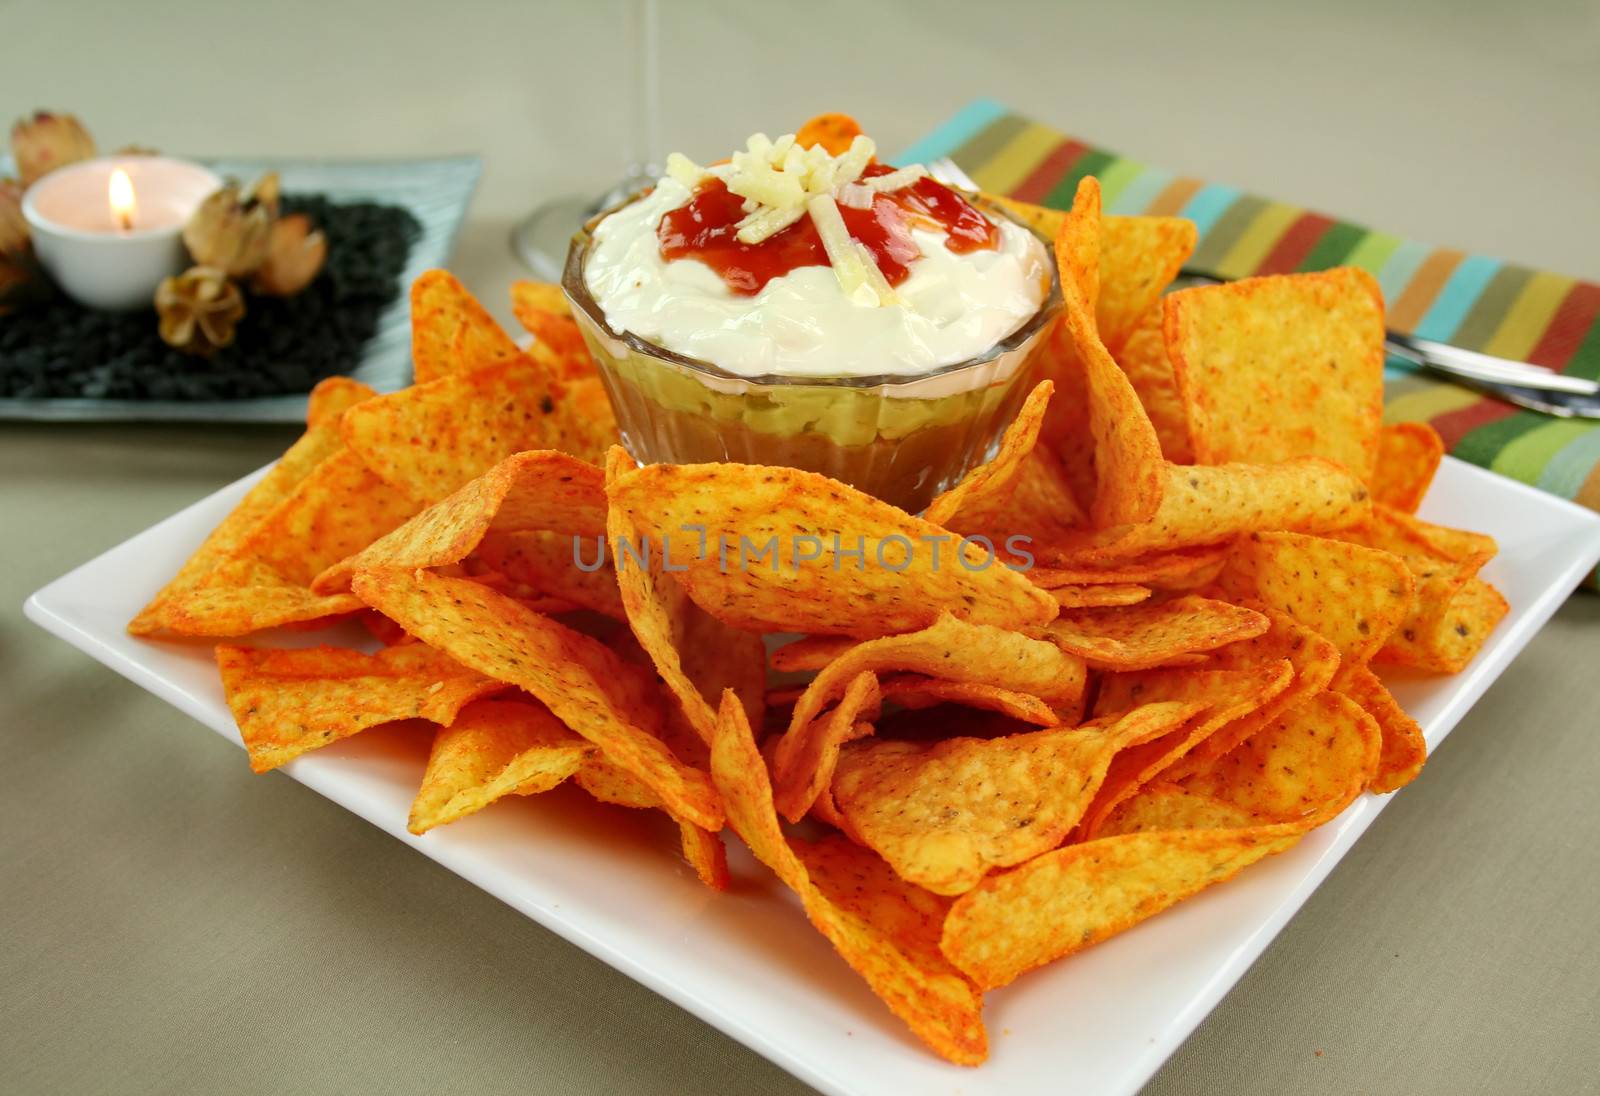 Nachos and Mexican dip topped with sour cream, salsa and grated cheese.